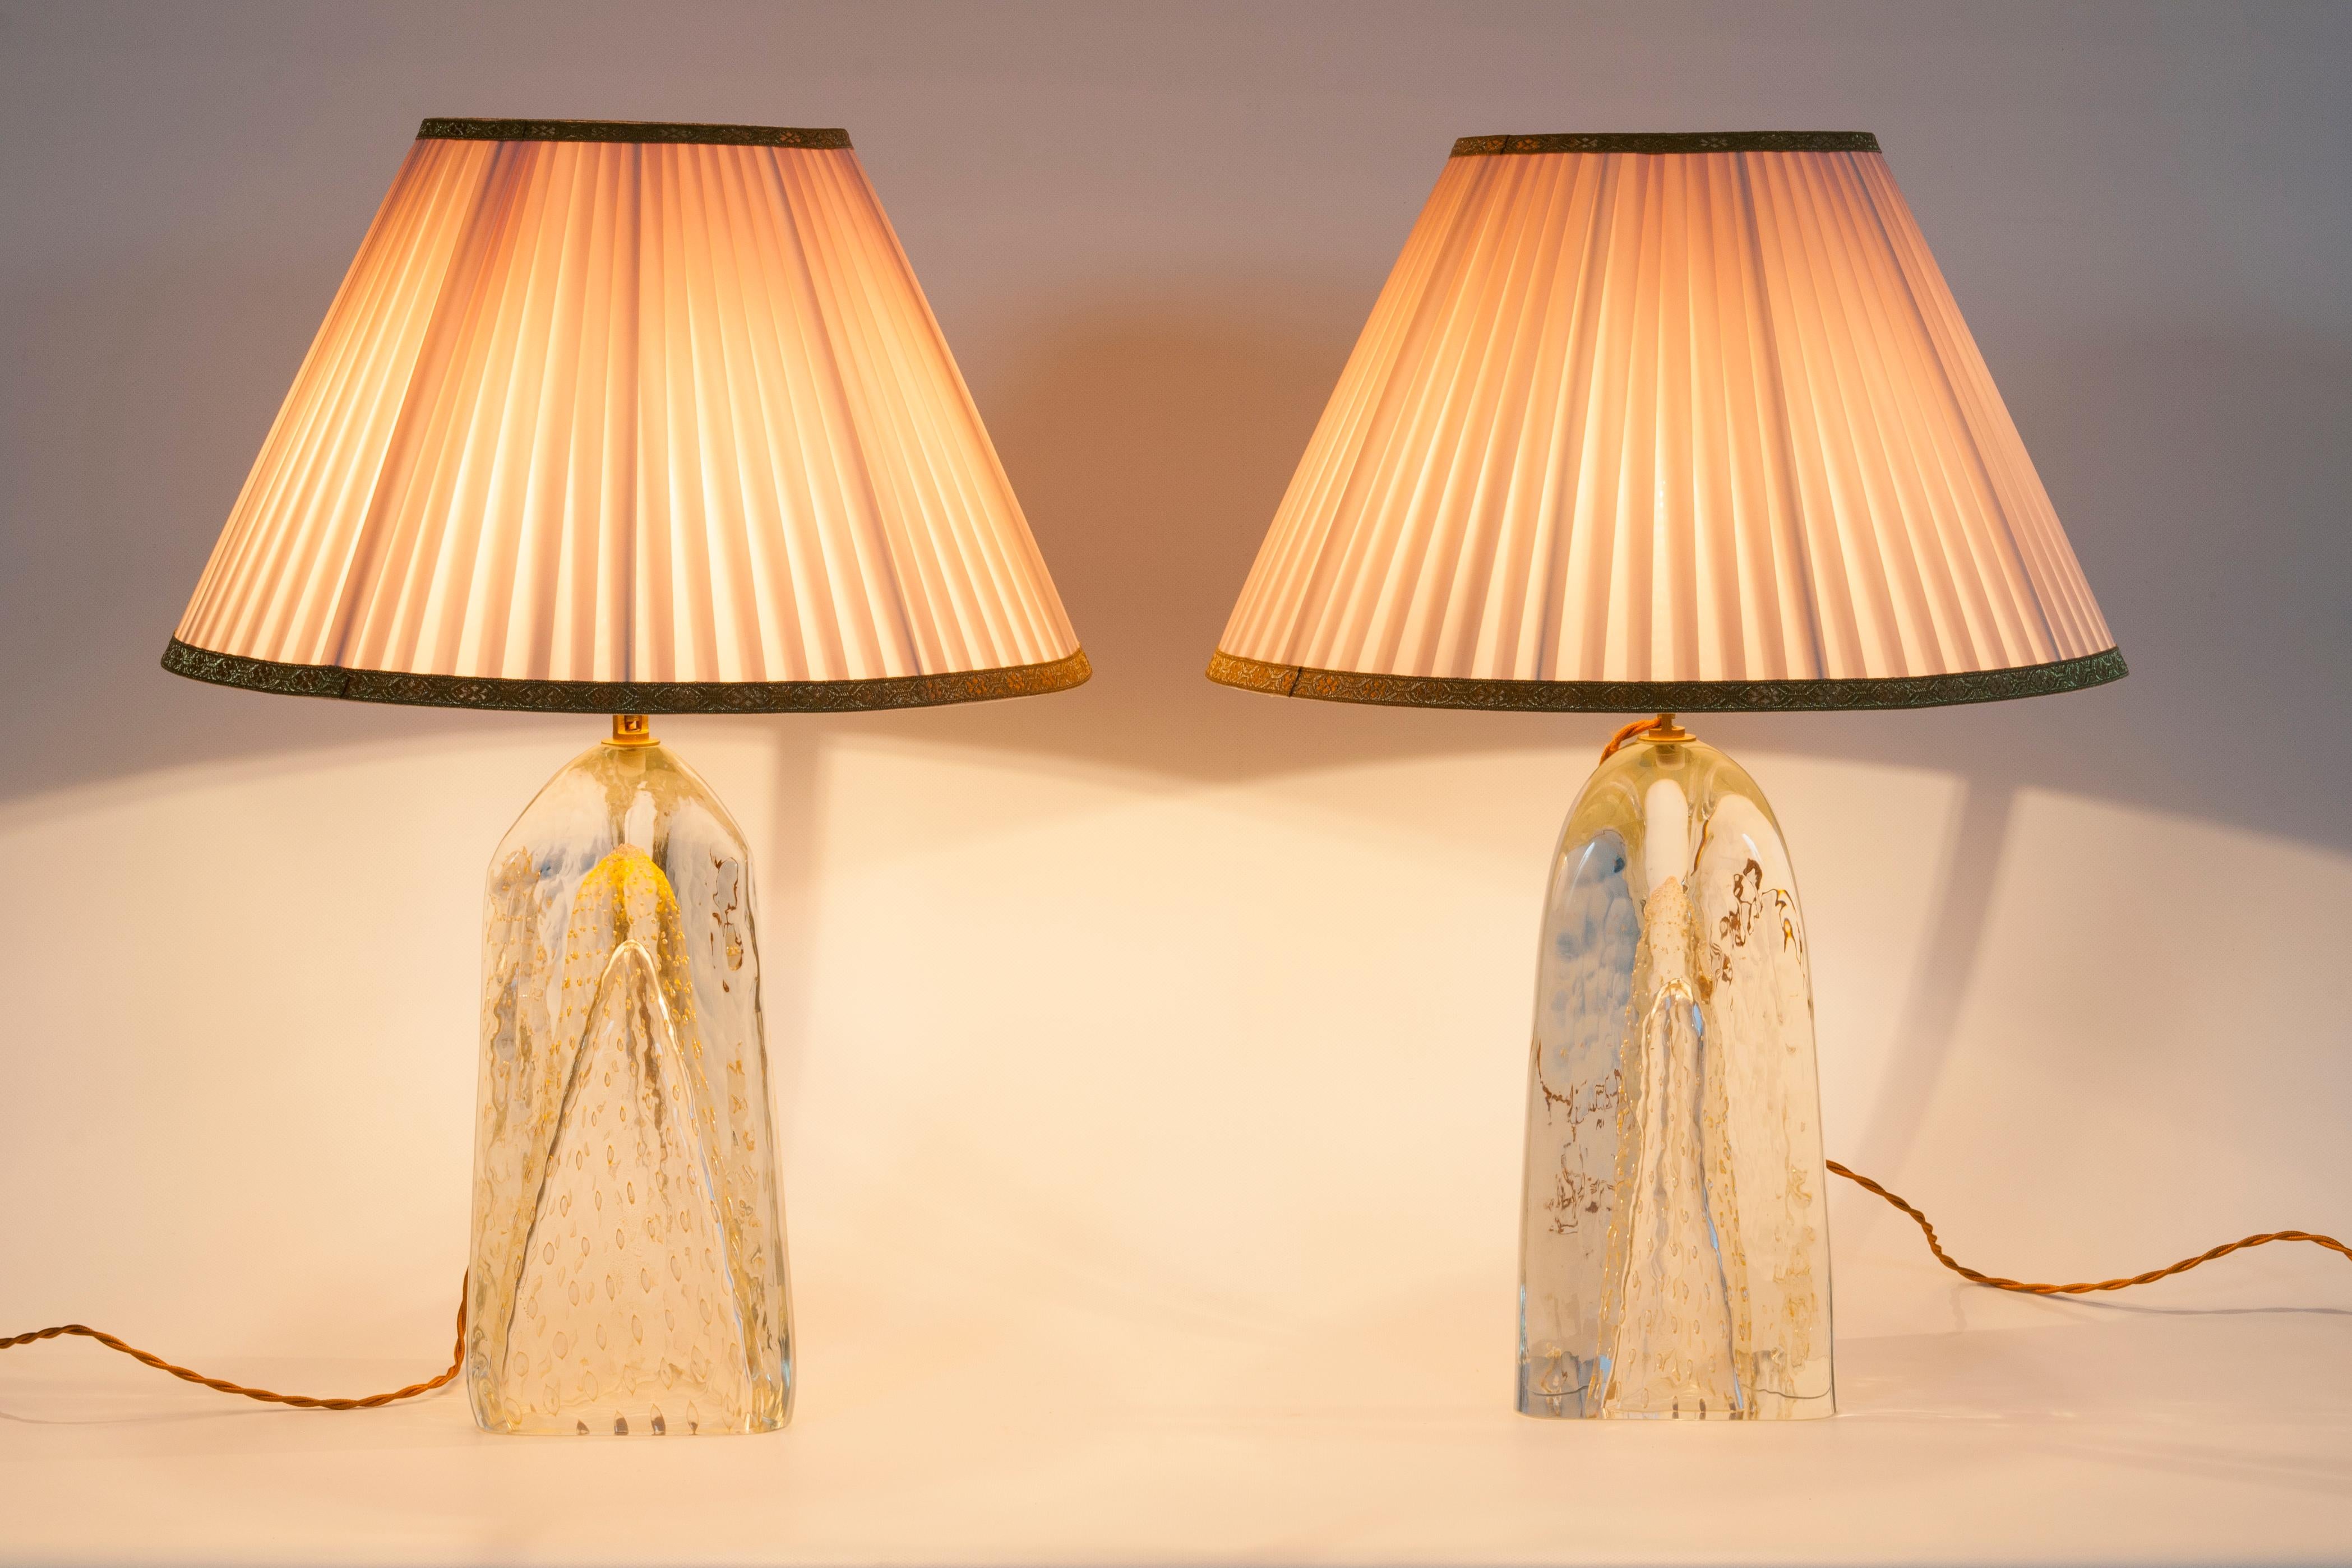 Pair of Murano Glass Triangle-Shaped Lamps with 24-Carat Gold, 1980s For Sale 10